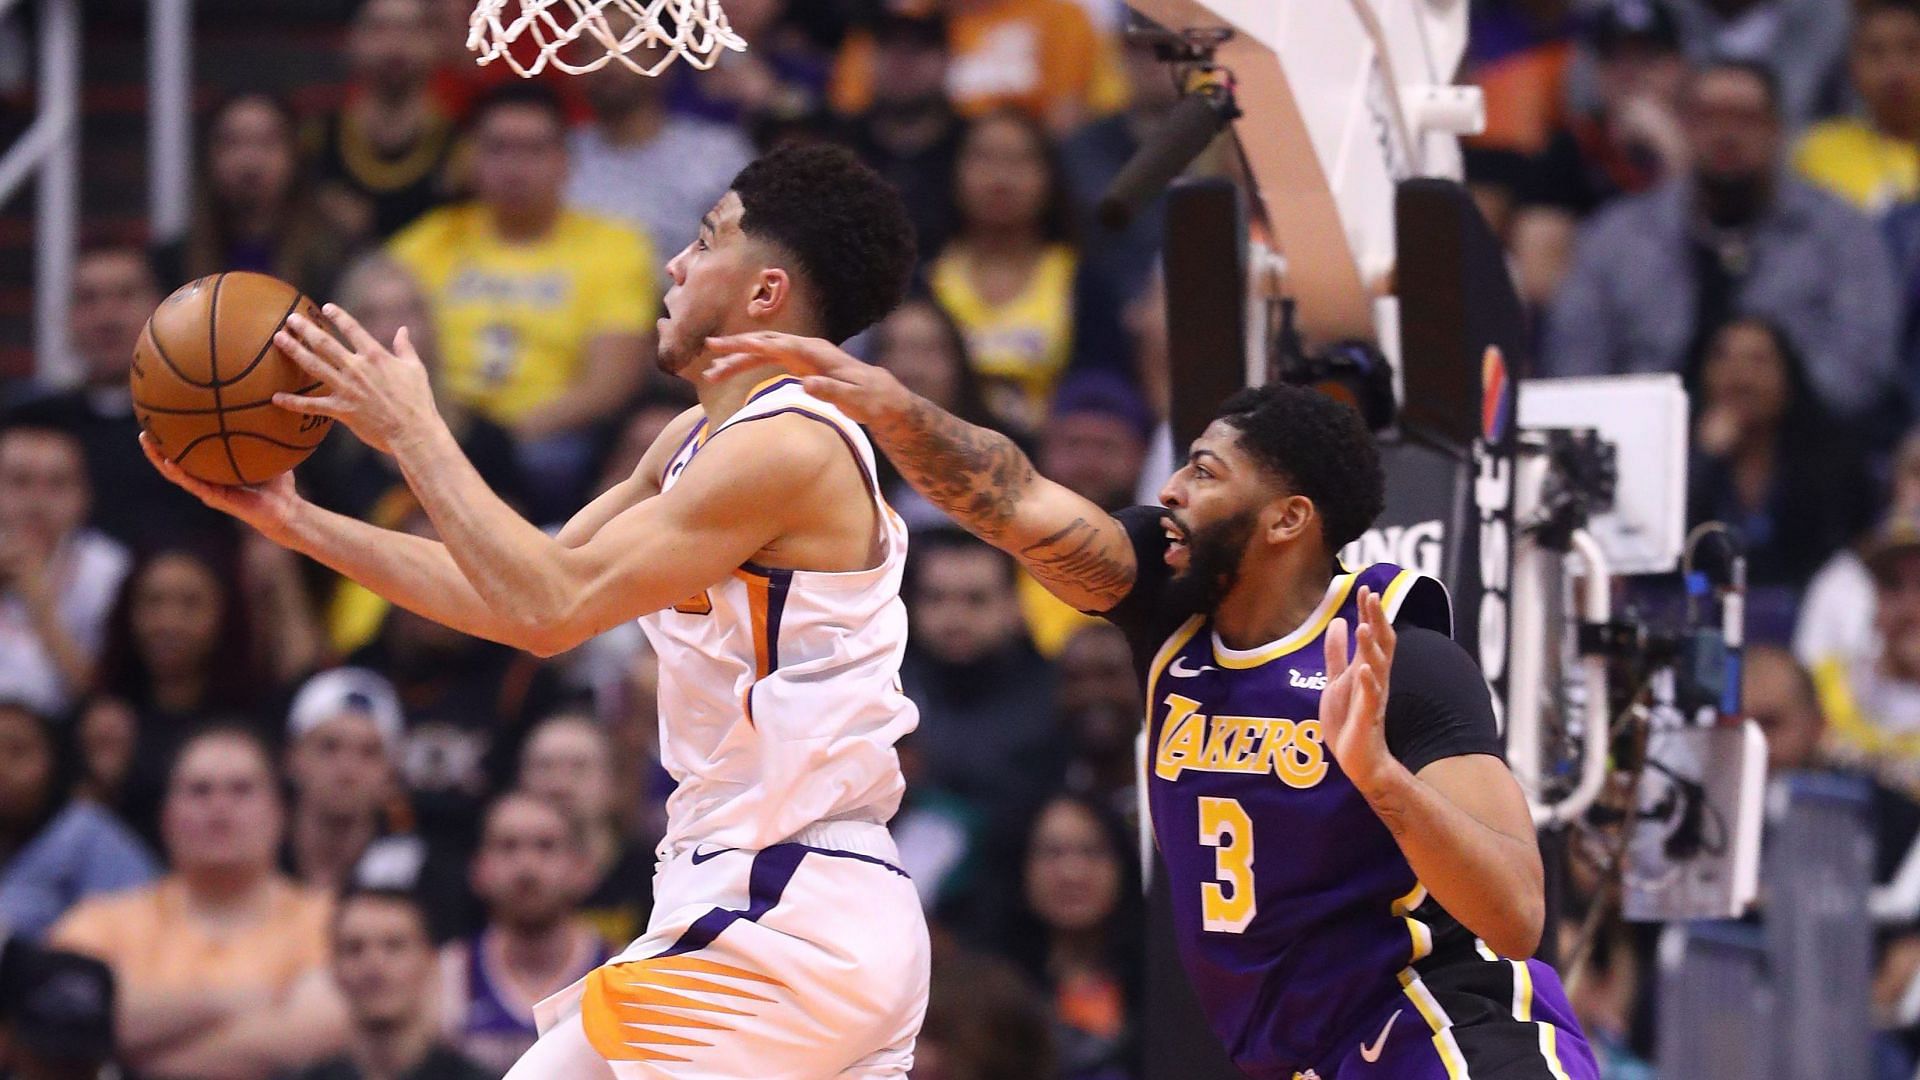 Anthony Davis is convinced that the Phoenix Suns had no shot at winning the series versus the LA Lakers if he had been healthy. [Photo: NBC Sports]